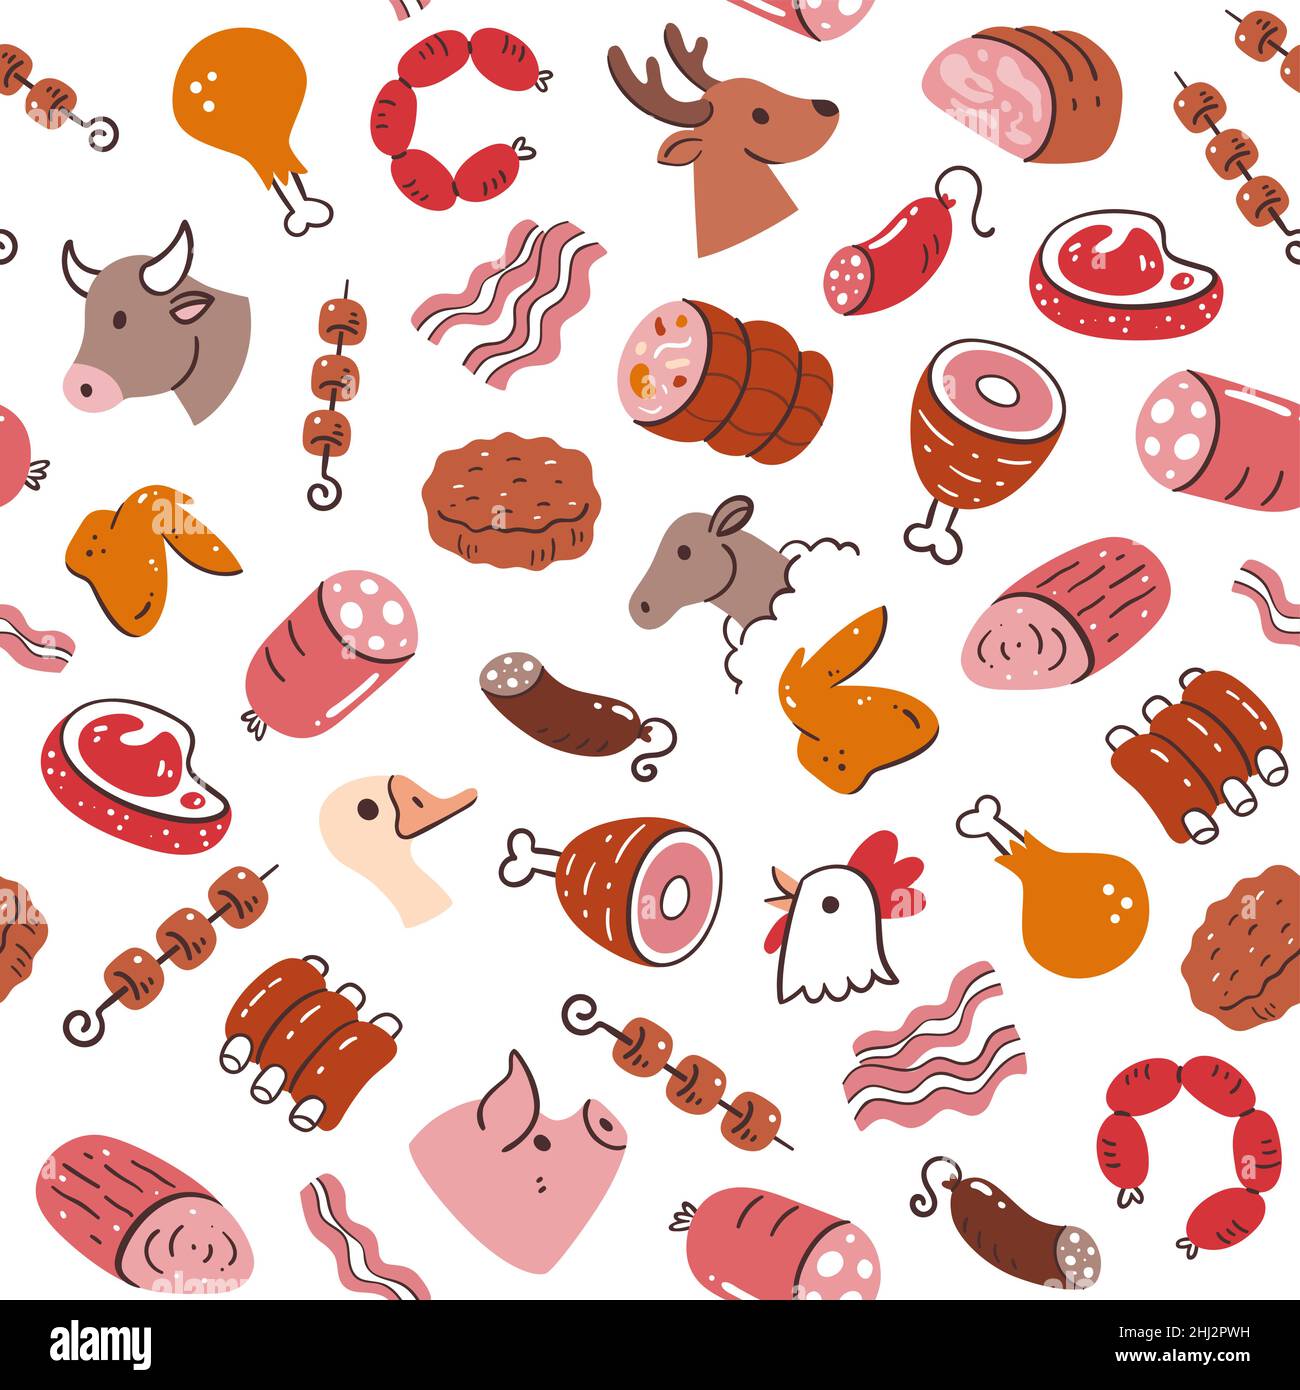 Meat seamless pattern. Pieces of meat and meat products. Food ingredients for cooking illustration. Isolated colorful hand-drawn ingredients on white Stock Vector